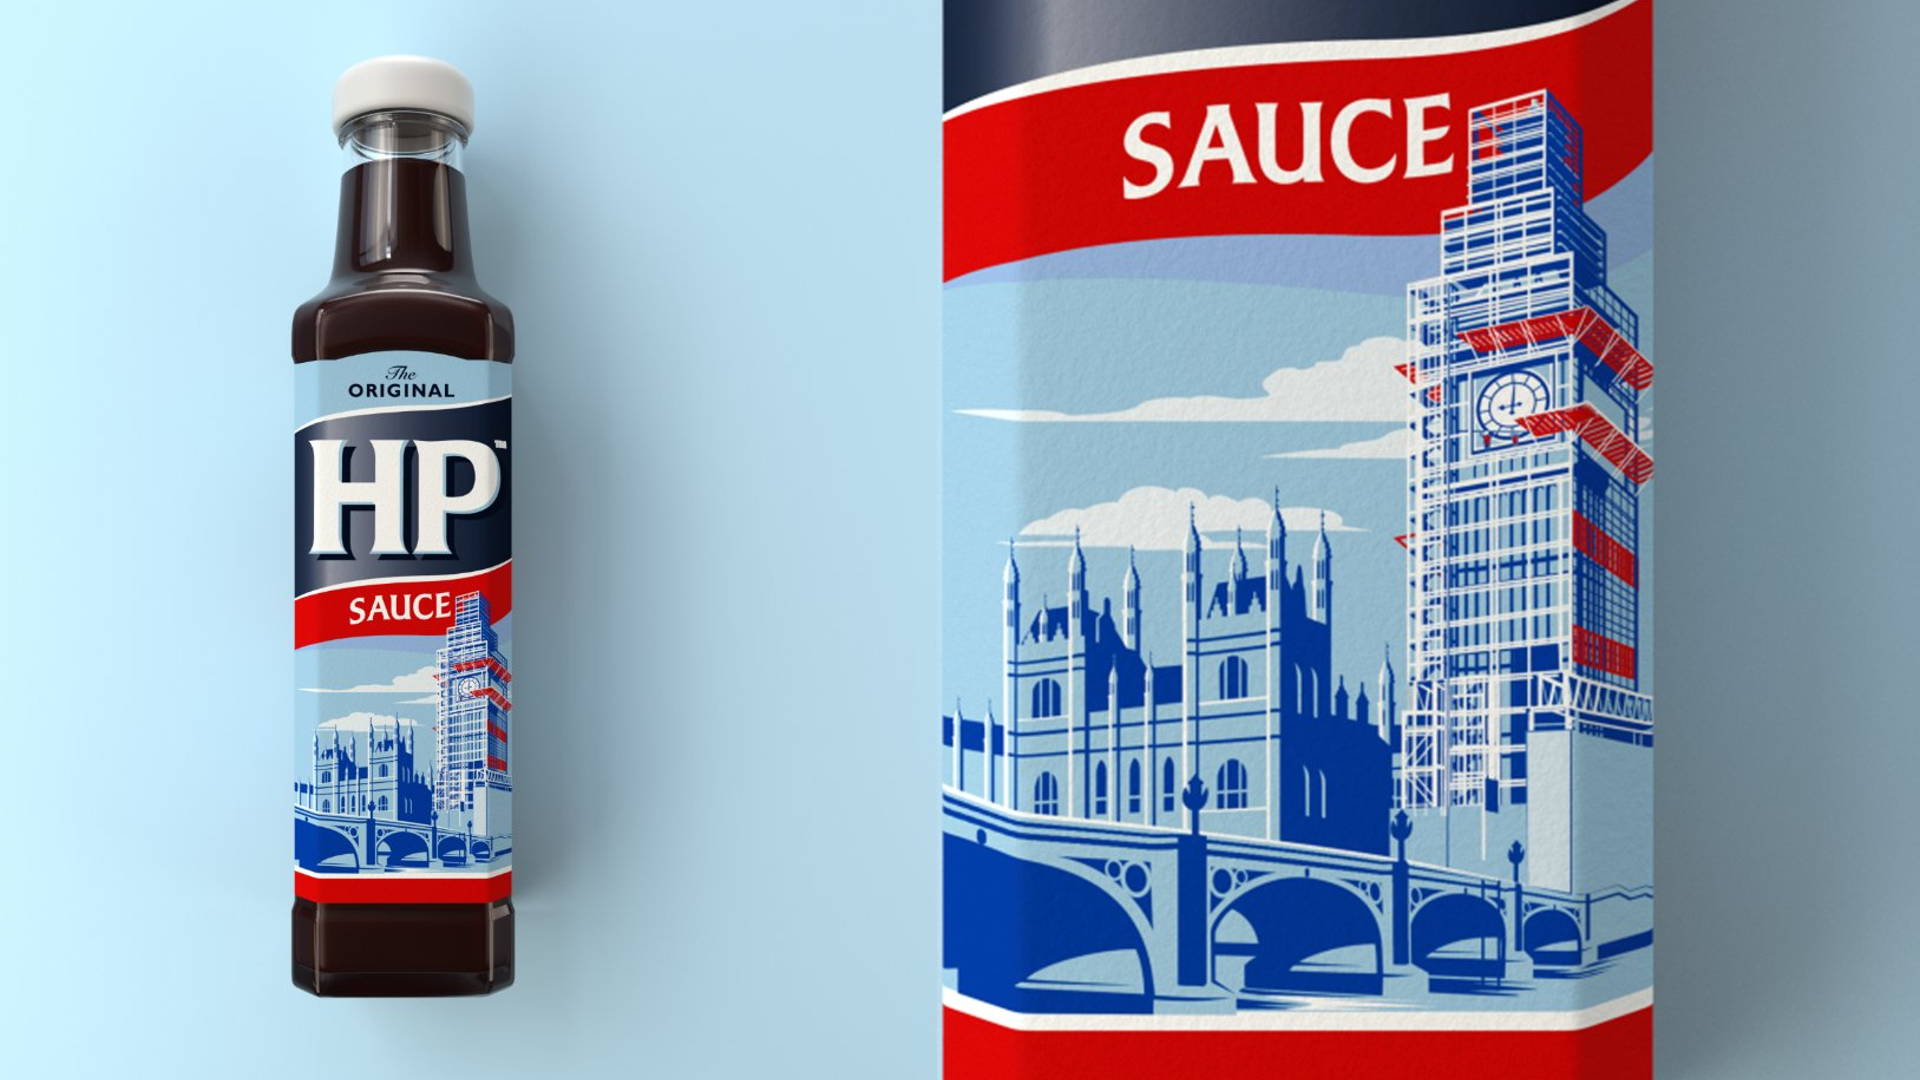 Featured image for British Favorite HP Sauce Gets a Slightly Updated Look Thanks To JKR